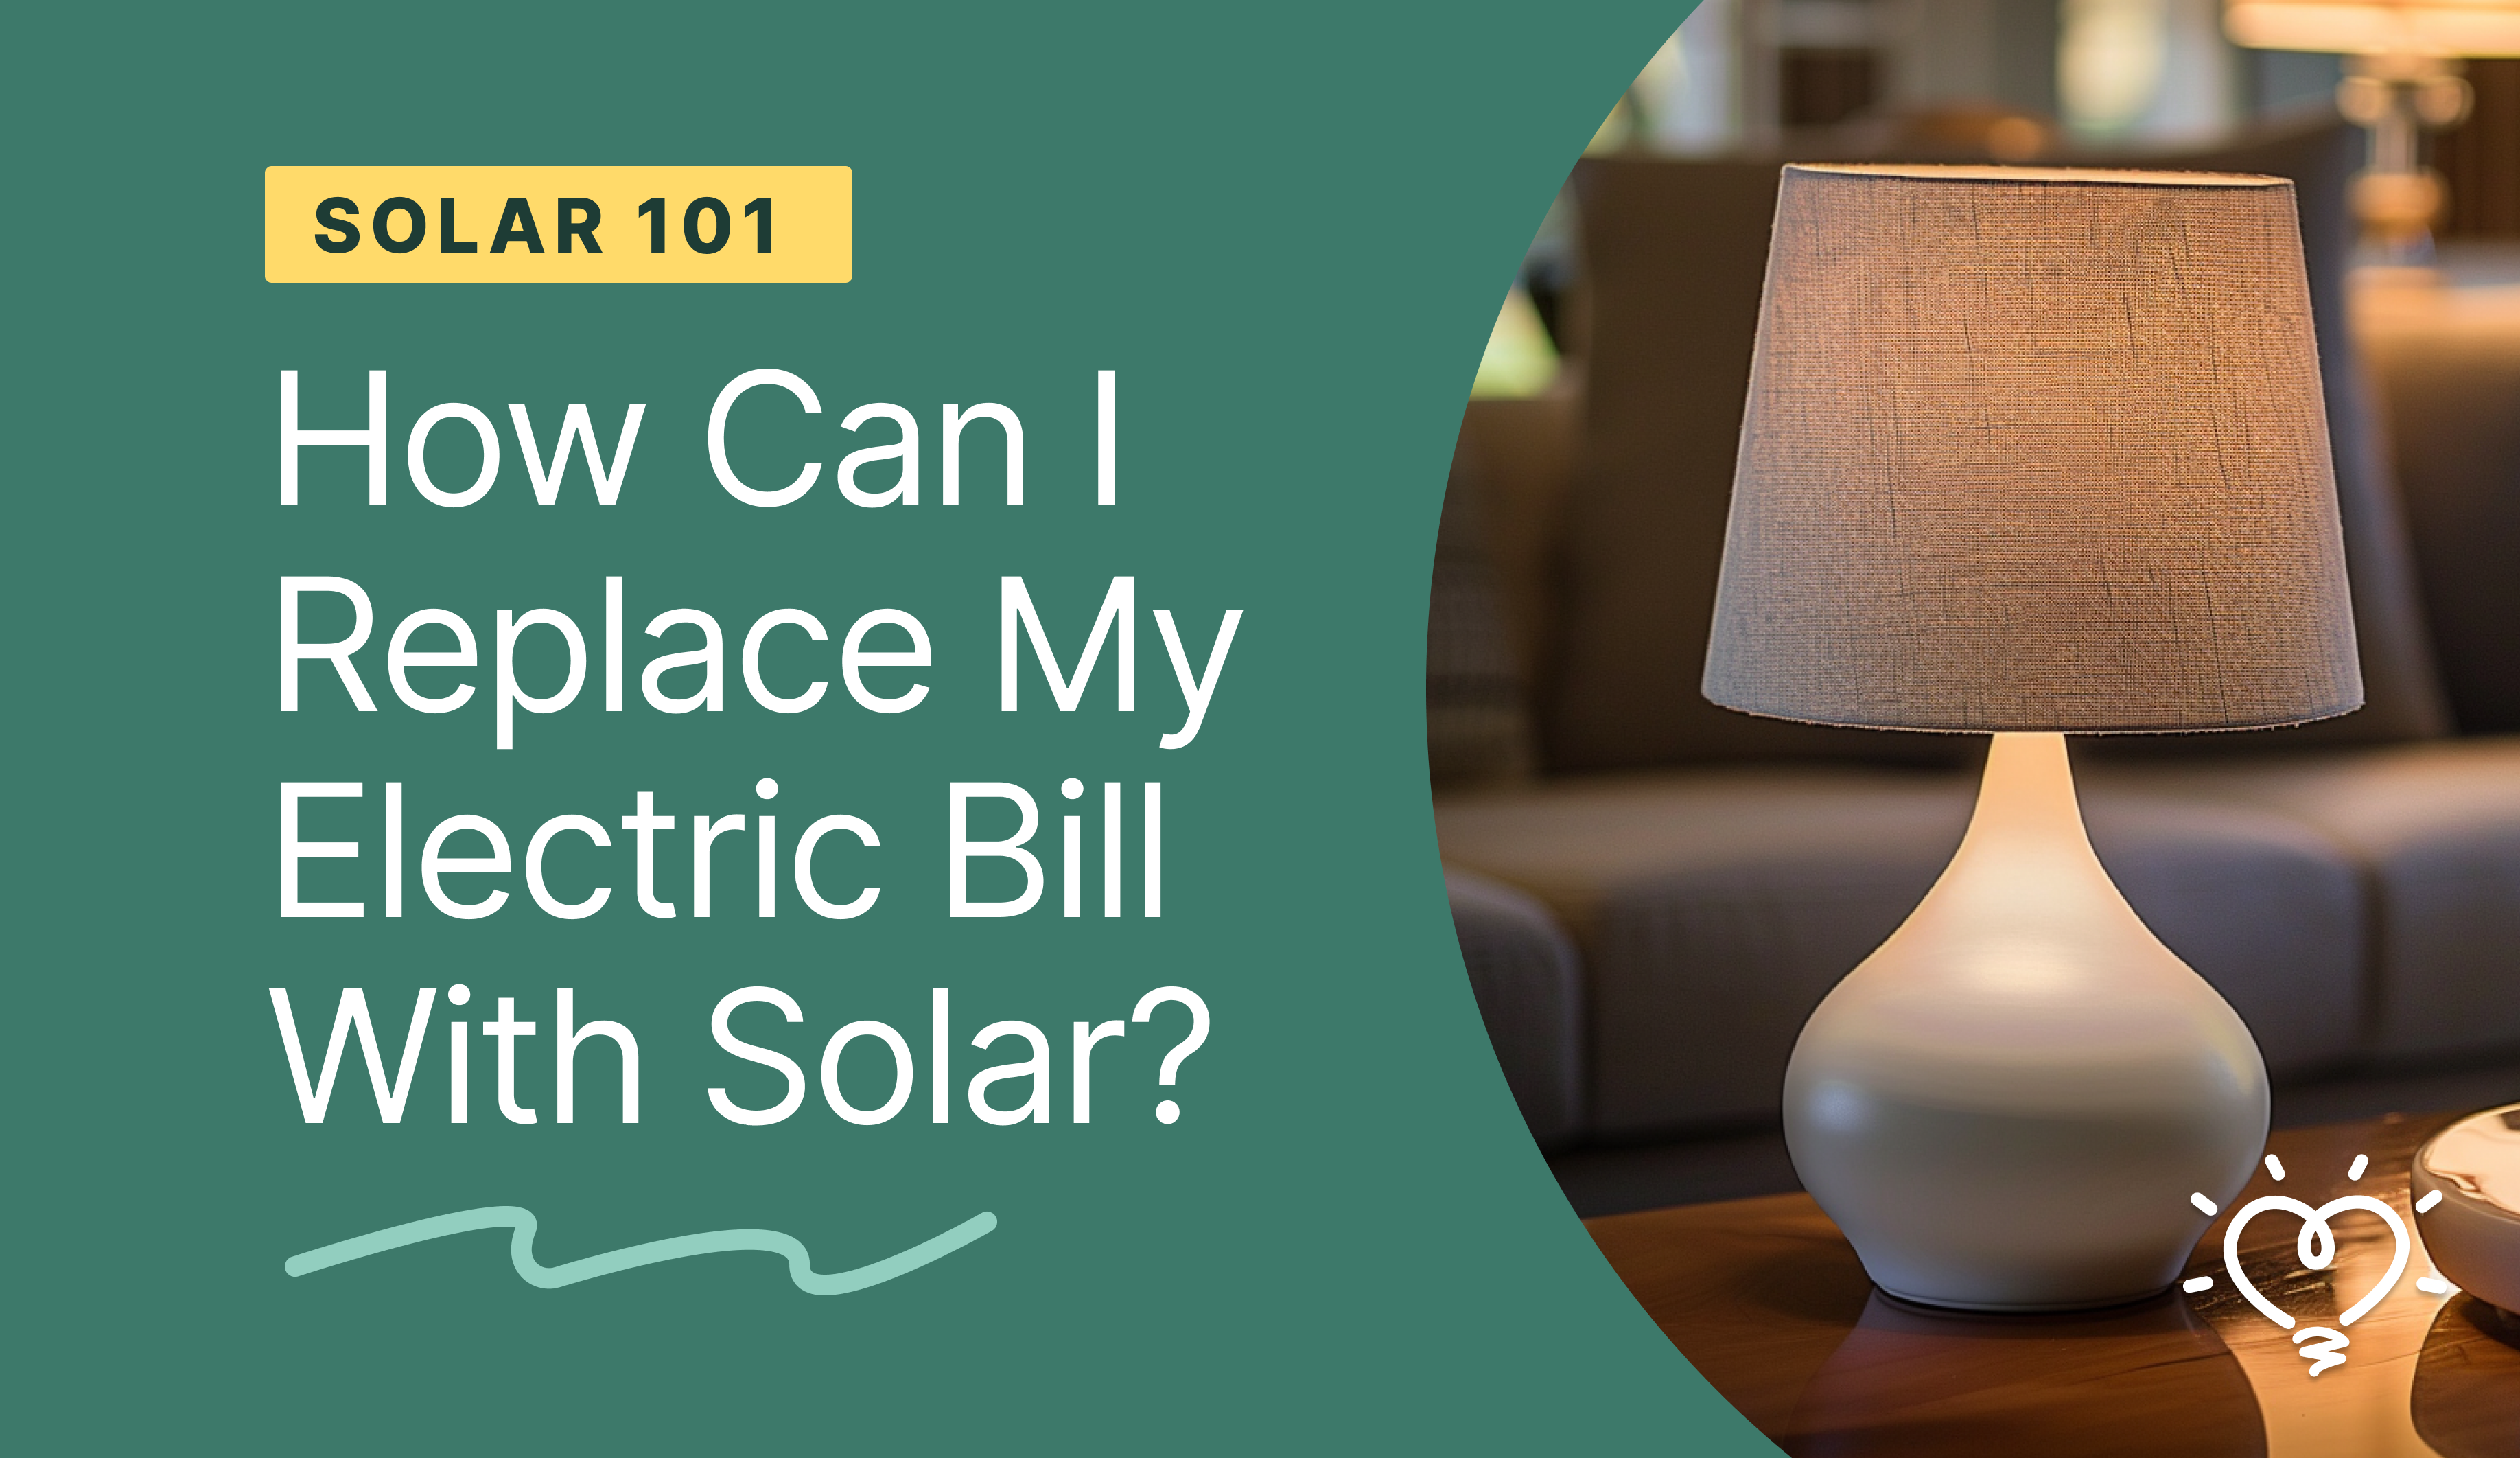 How Can I Replace My Electric Bill With Solar?